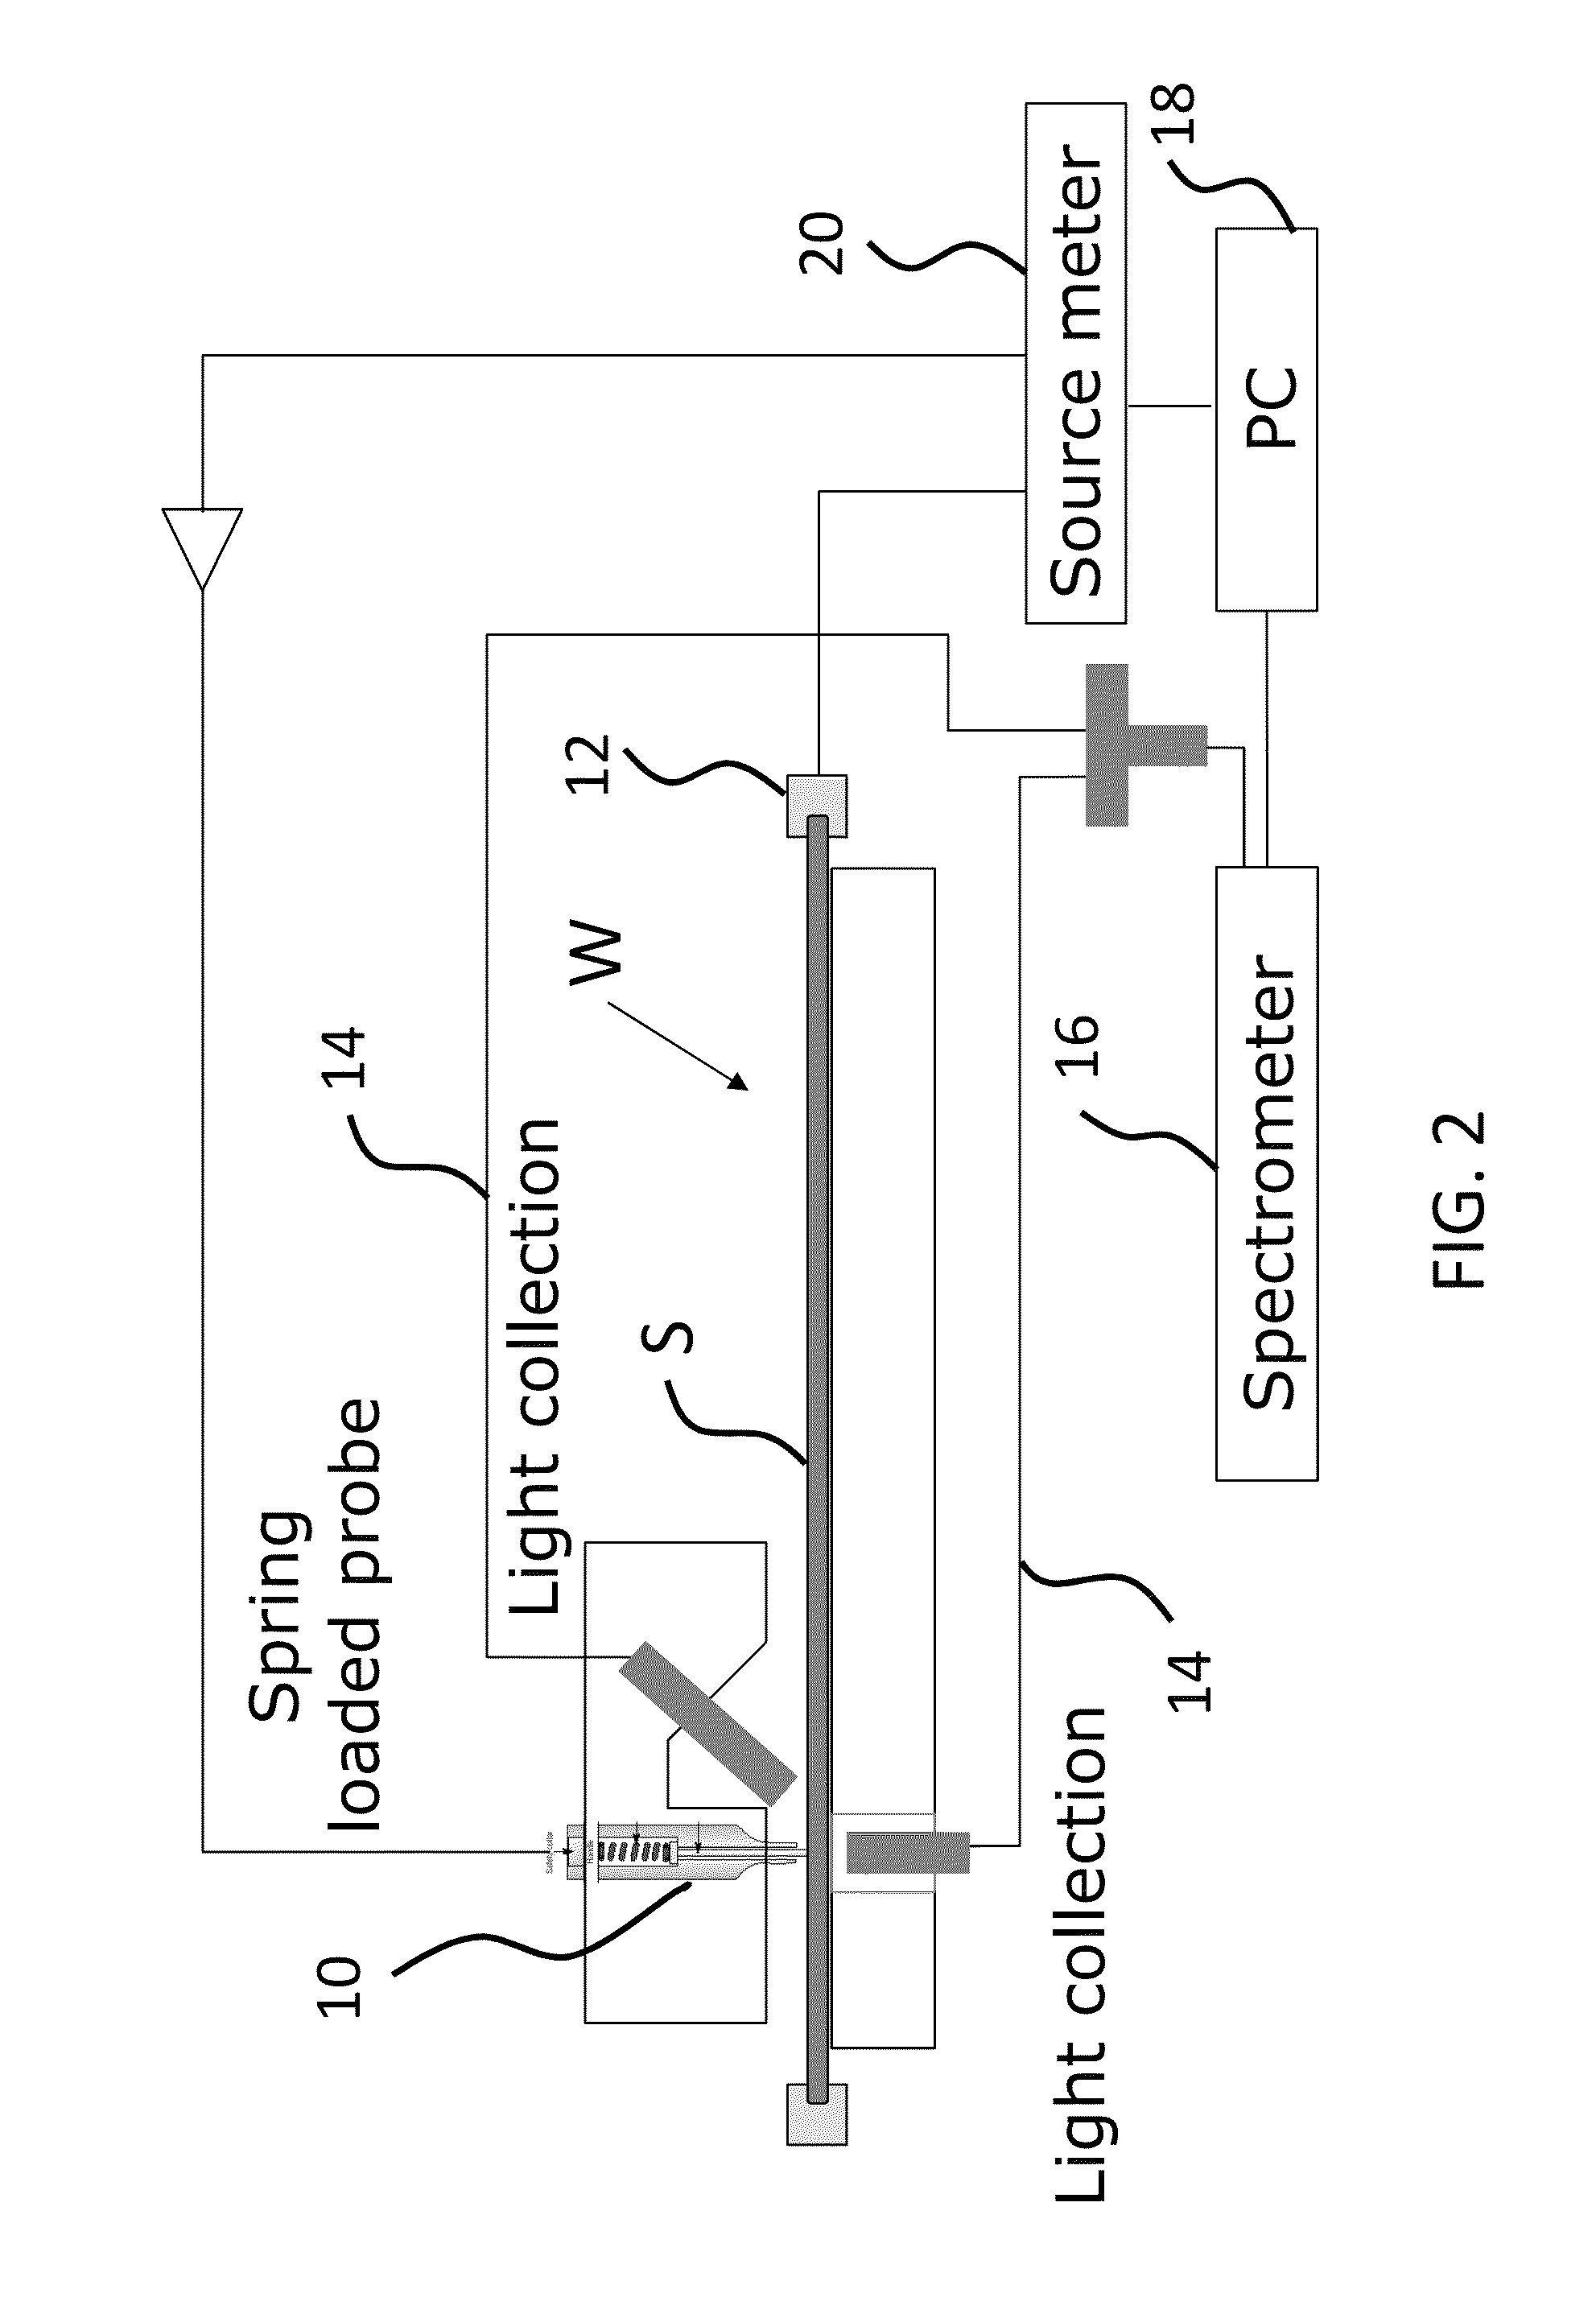 Probe and method of manufacture for semiconductor wafer characterization